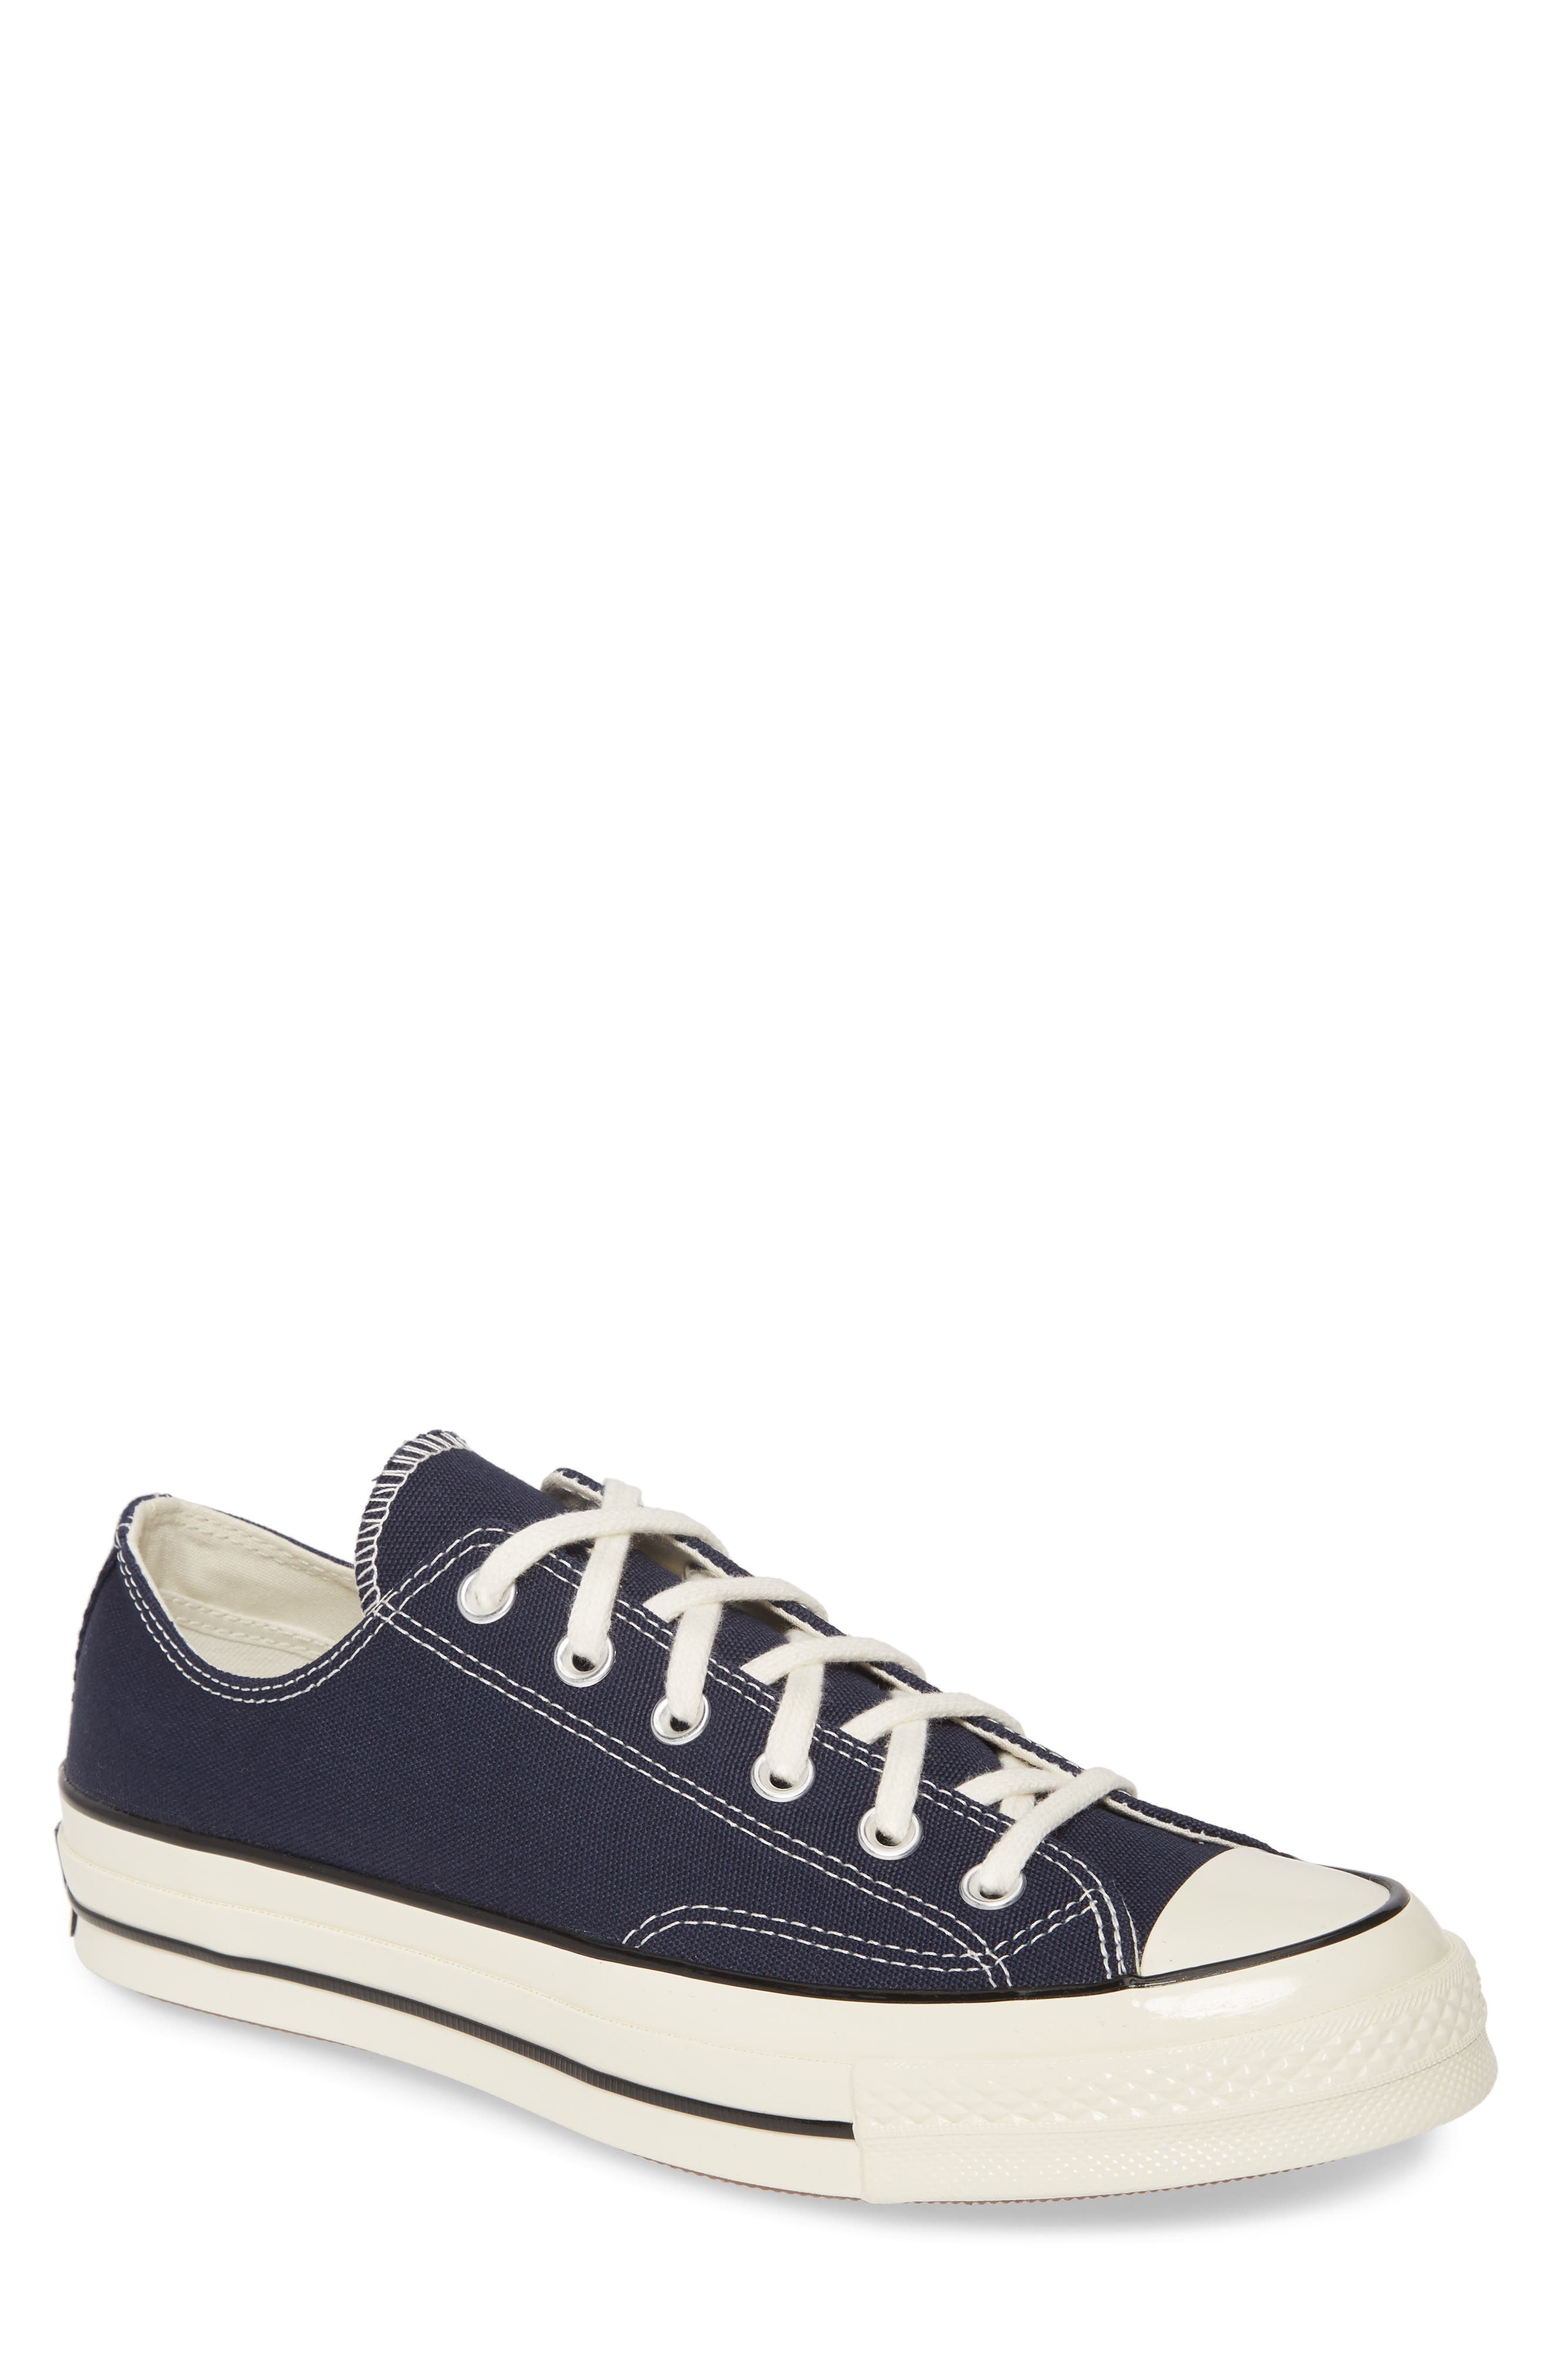 Converse Shoes Sale \u0026 Clearance | Nordstrom